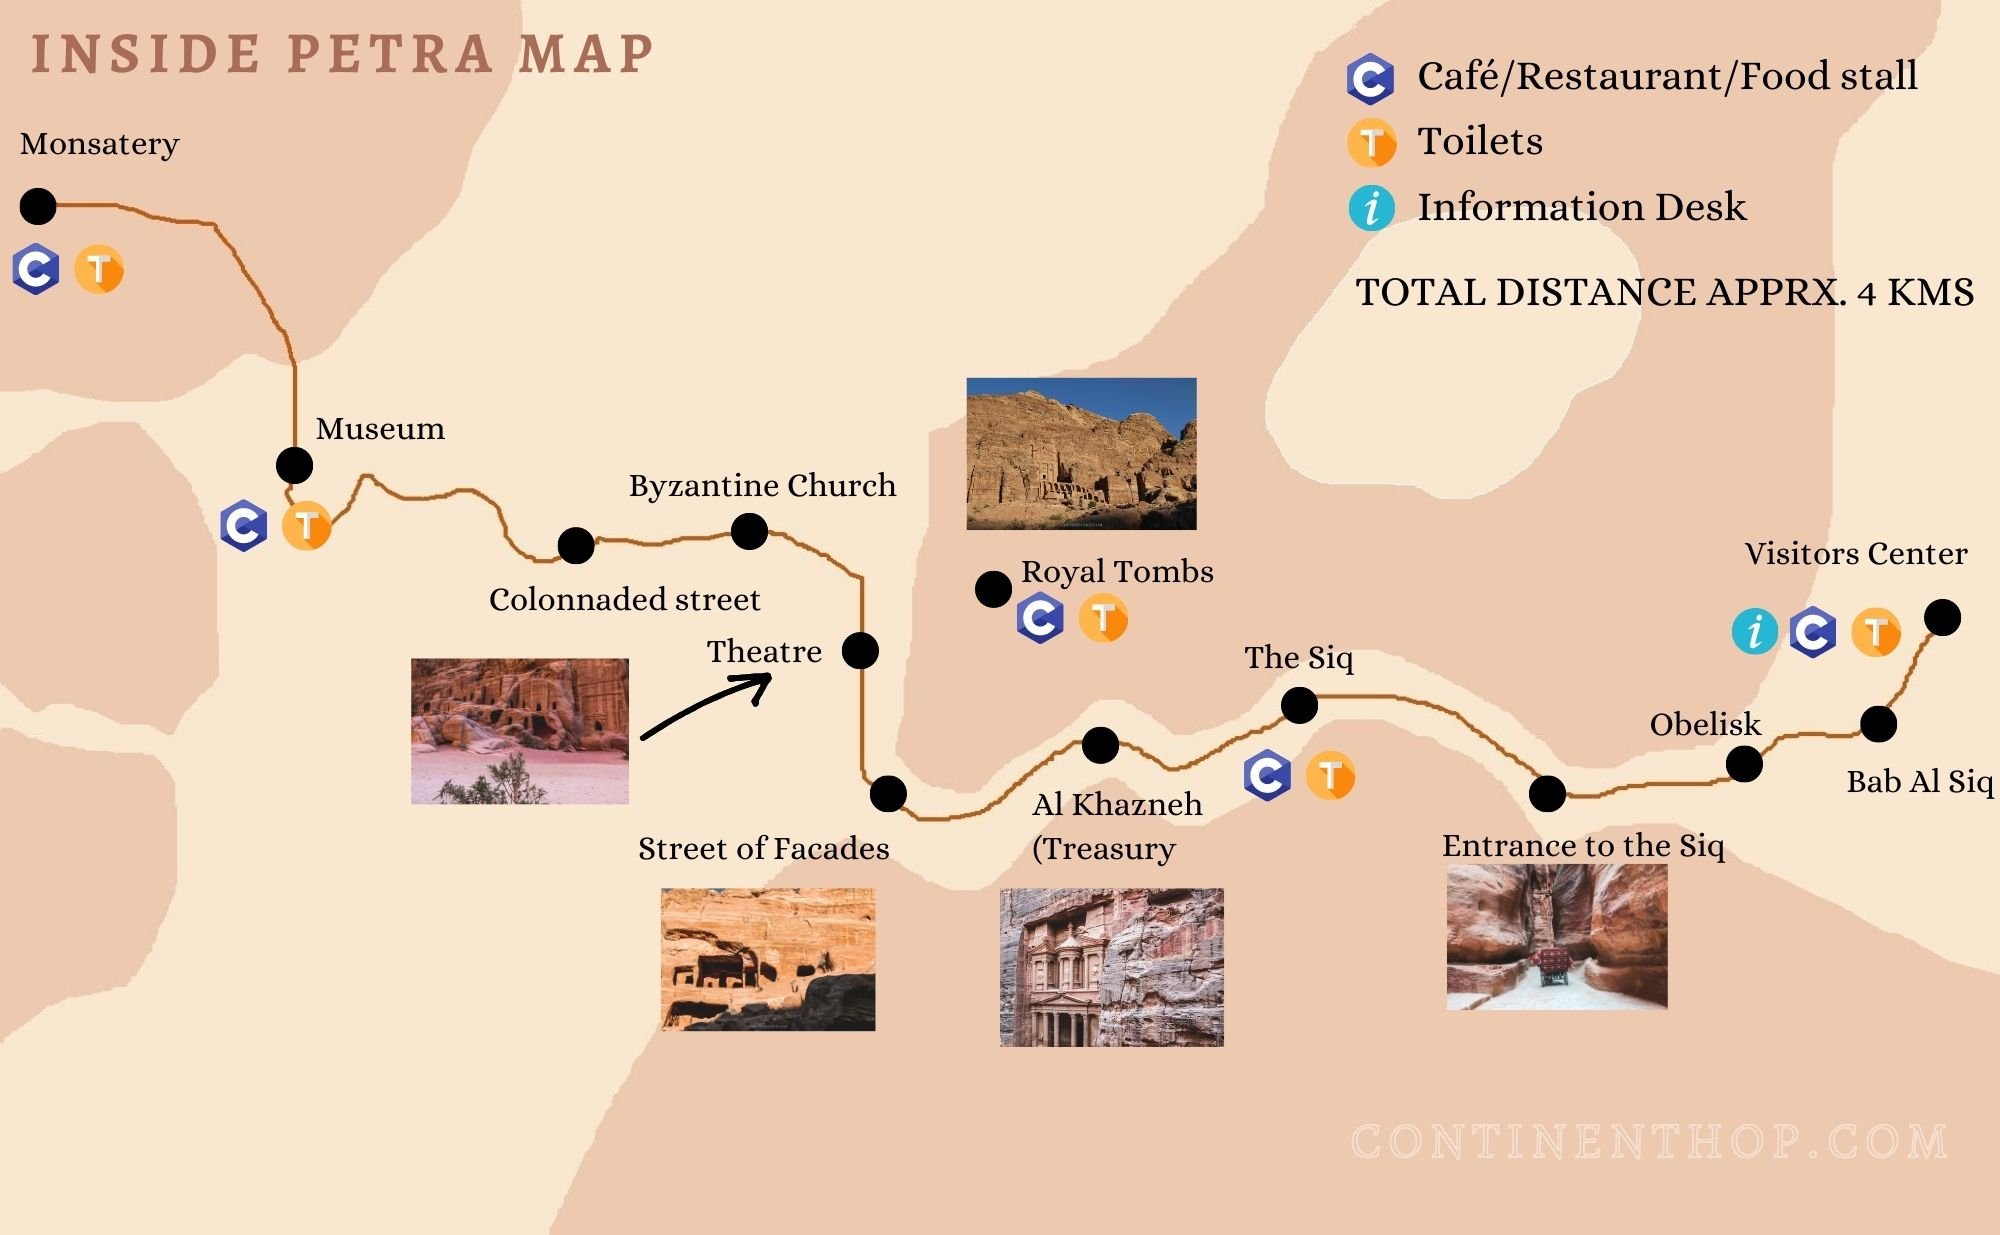 Petra map with Petra attractions inside it including Petra by night